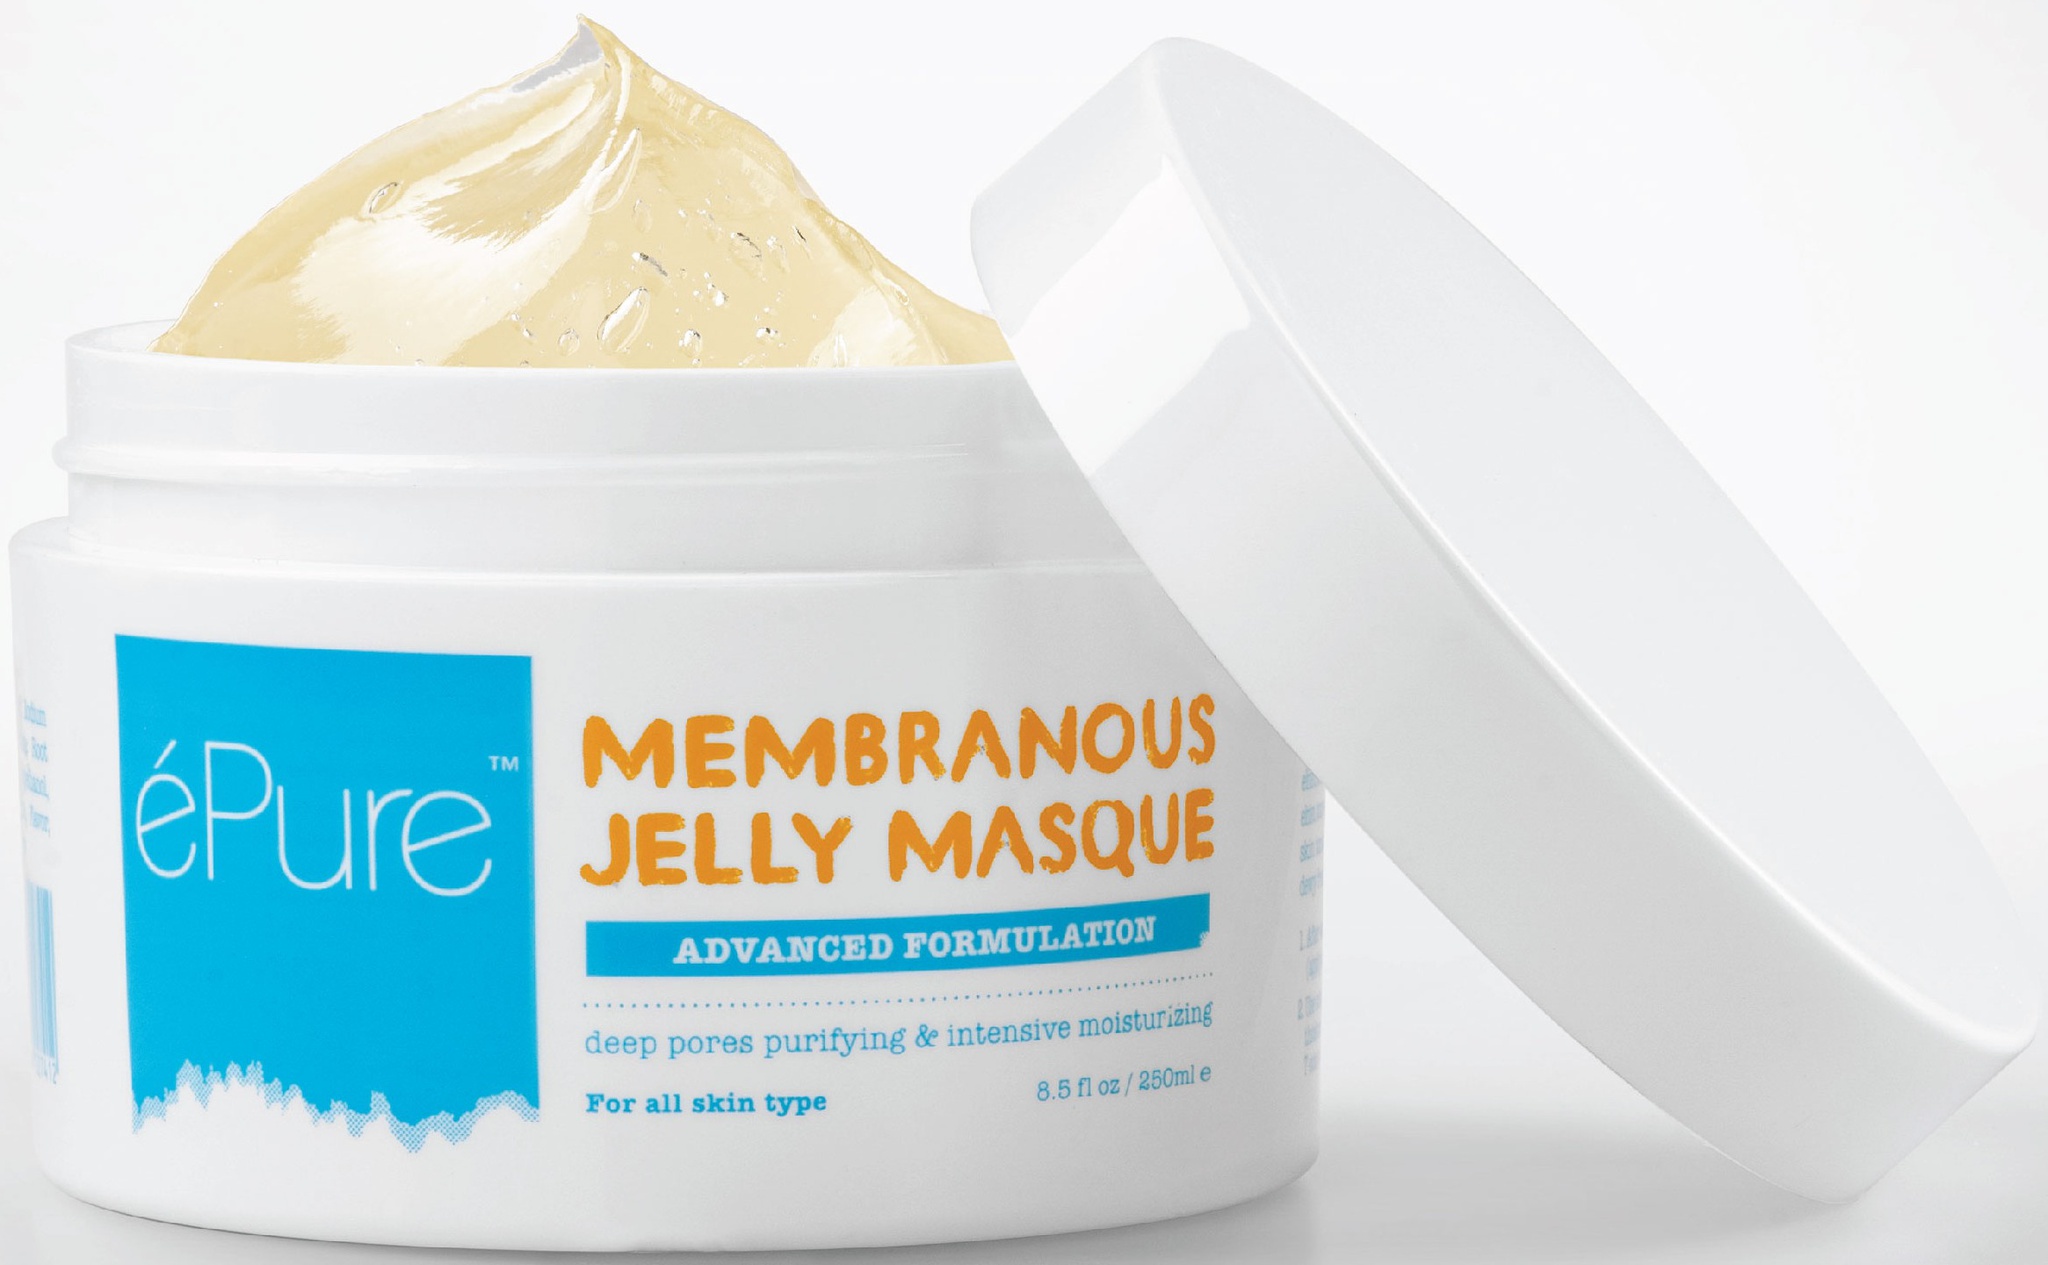 epure Membranous Jelly Masque